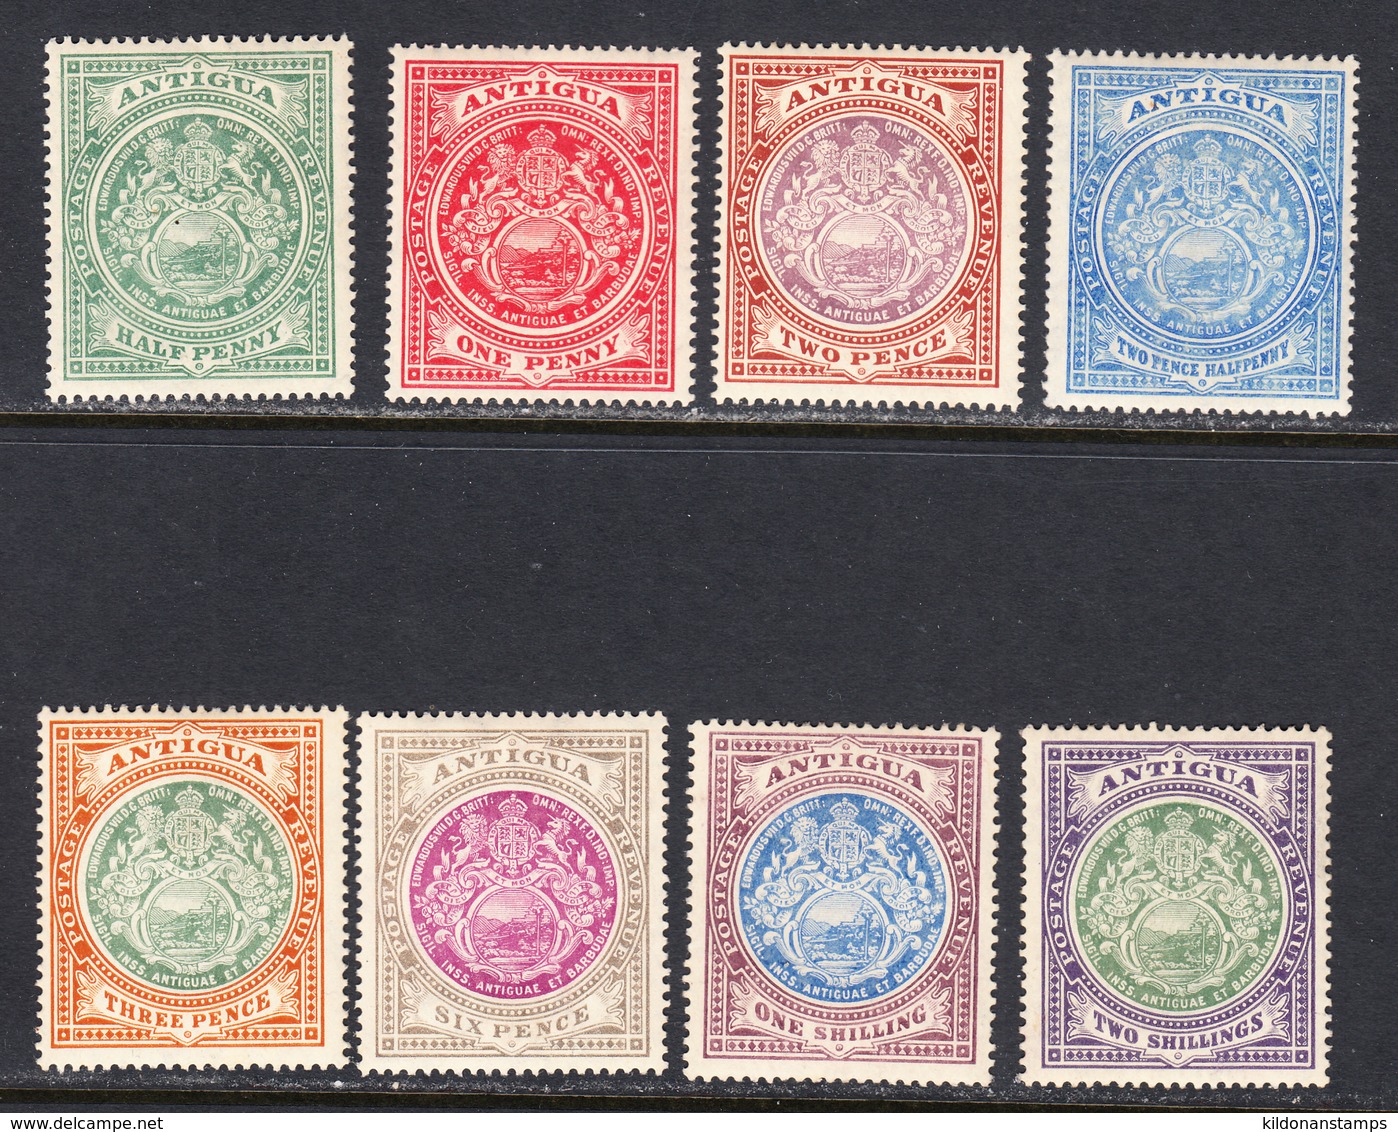 Antigua 1908-17 Mint Mounted, Sc# 31-38, SG 41-50 - 1858-1960 Crown Colony